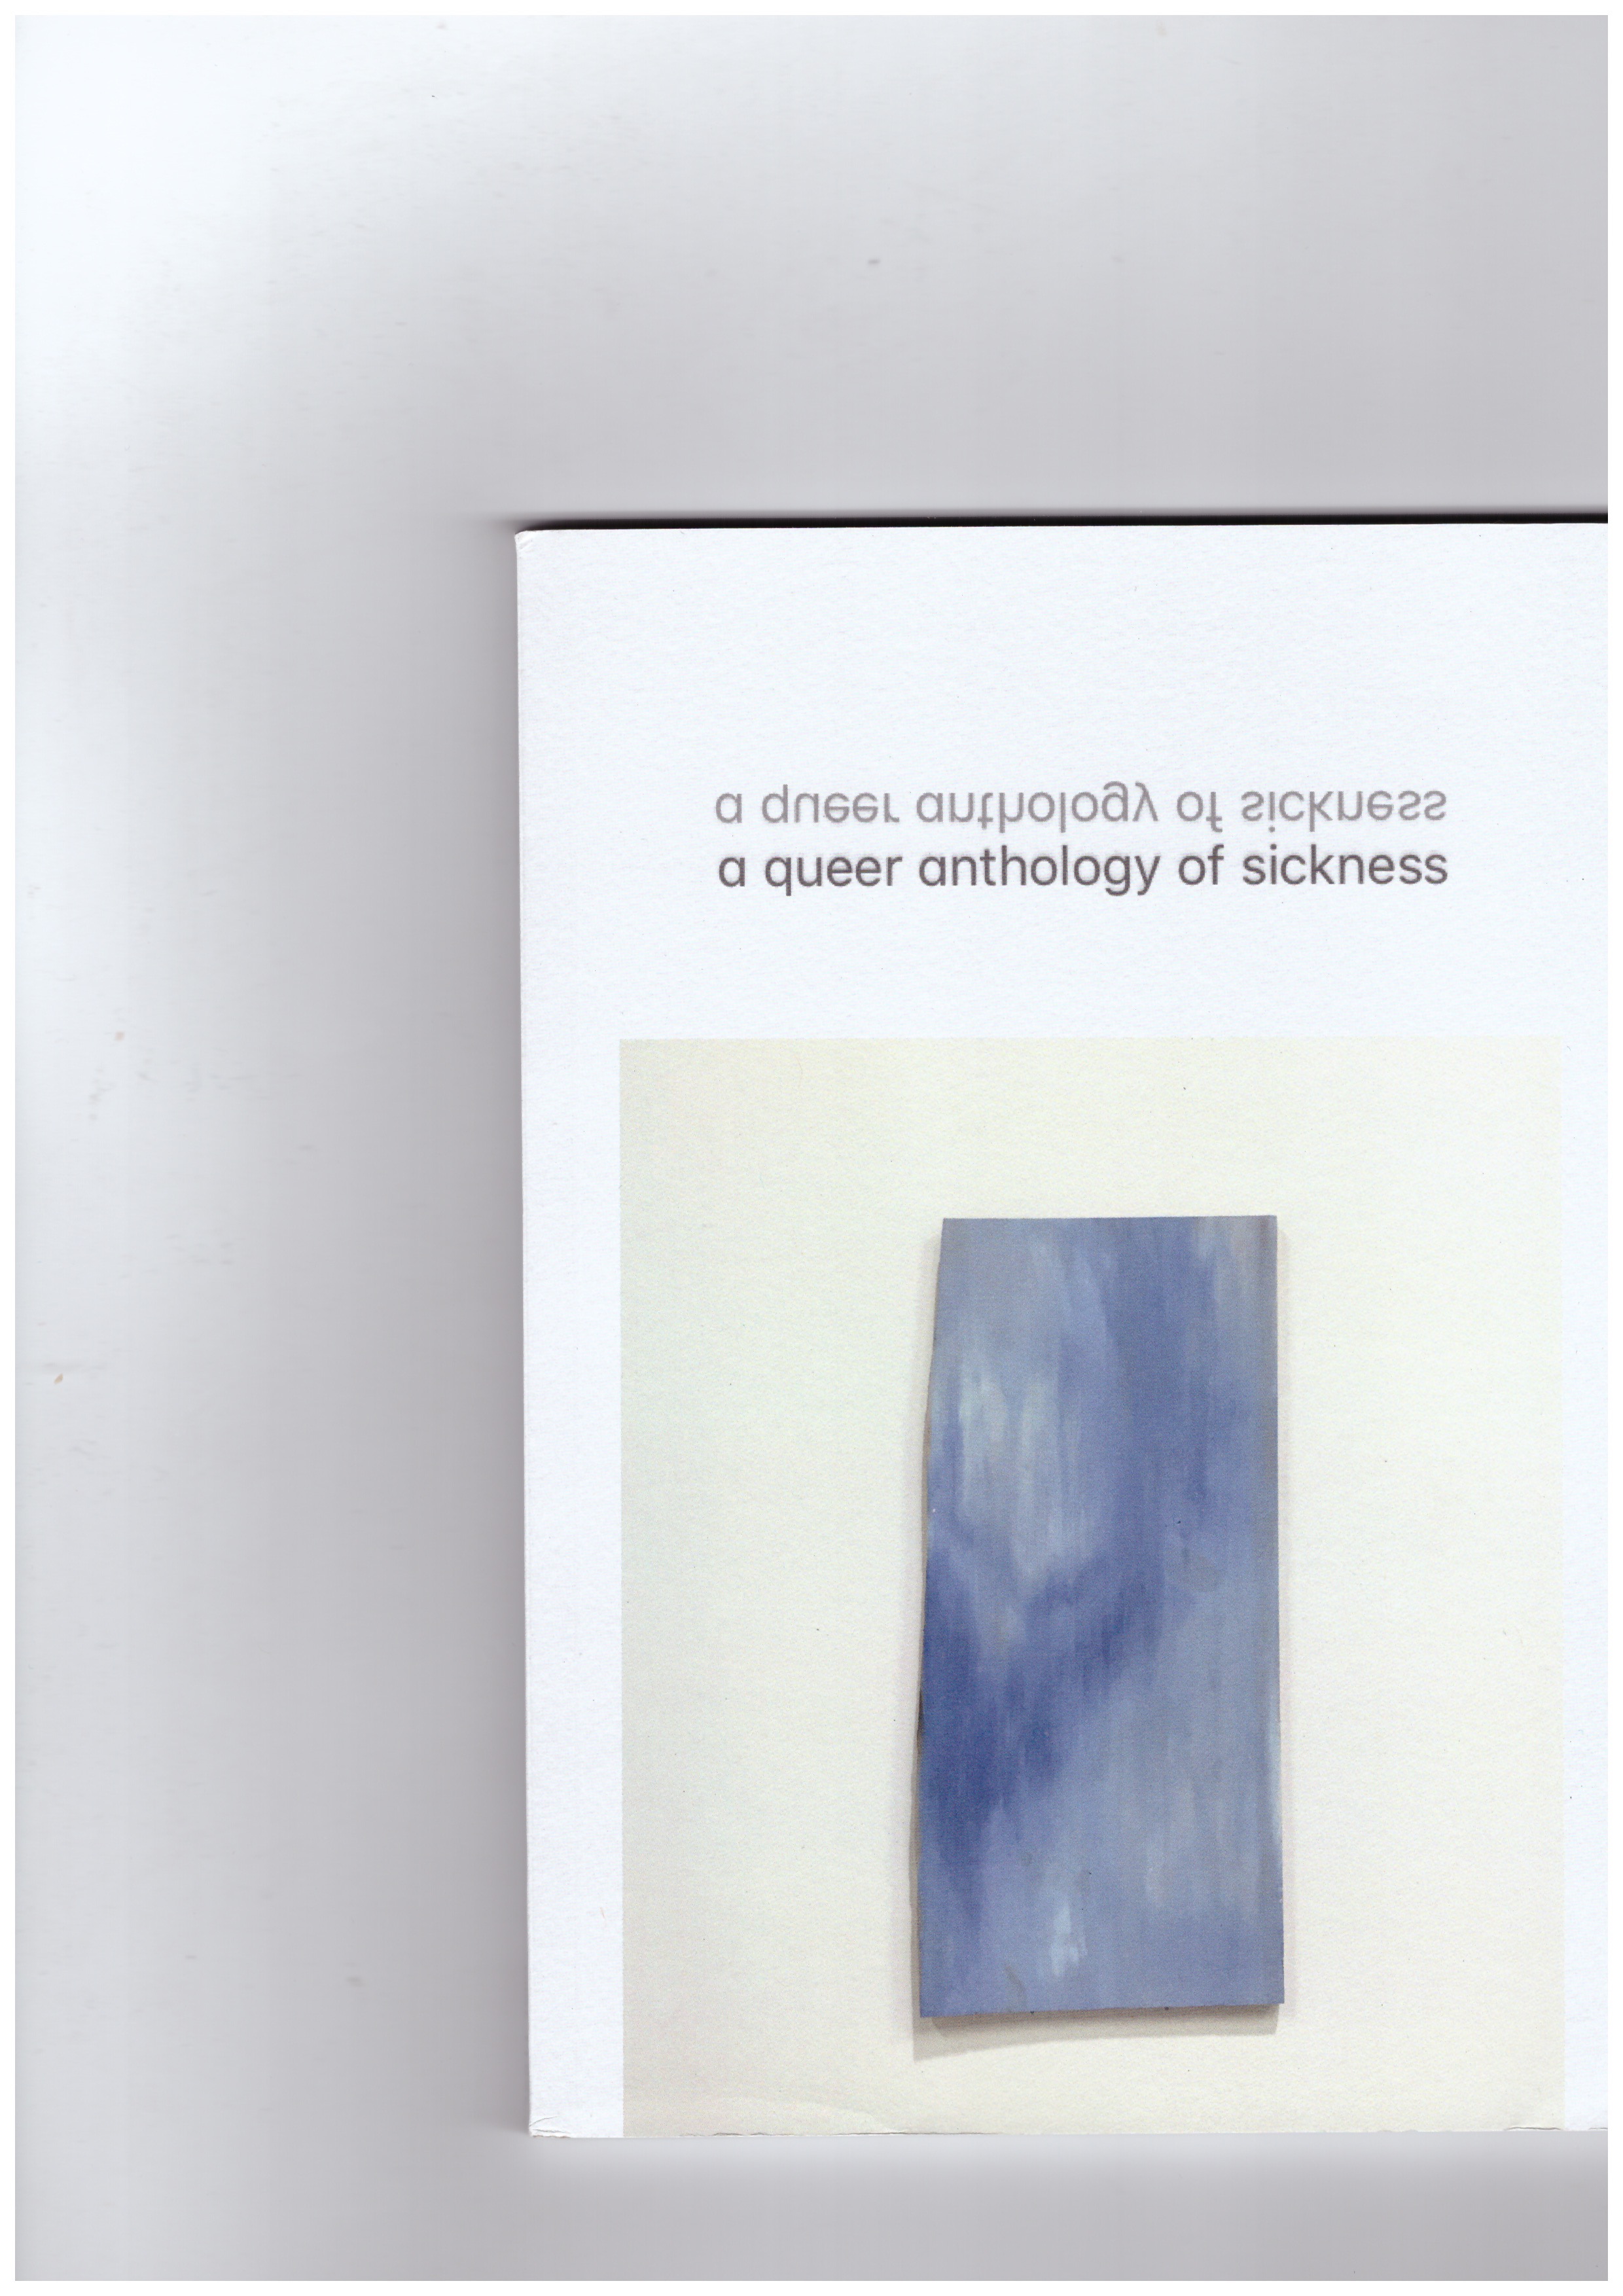 PORTER, Richard (ed.) - A queer anthology of sickness